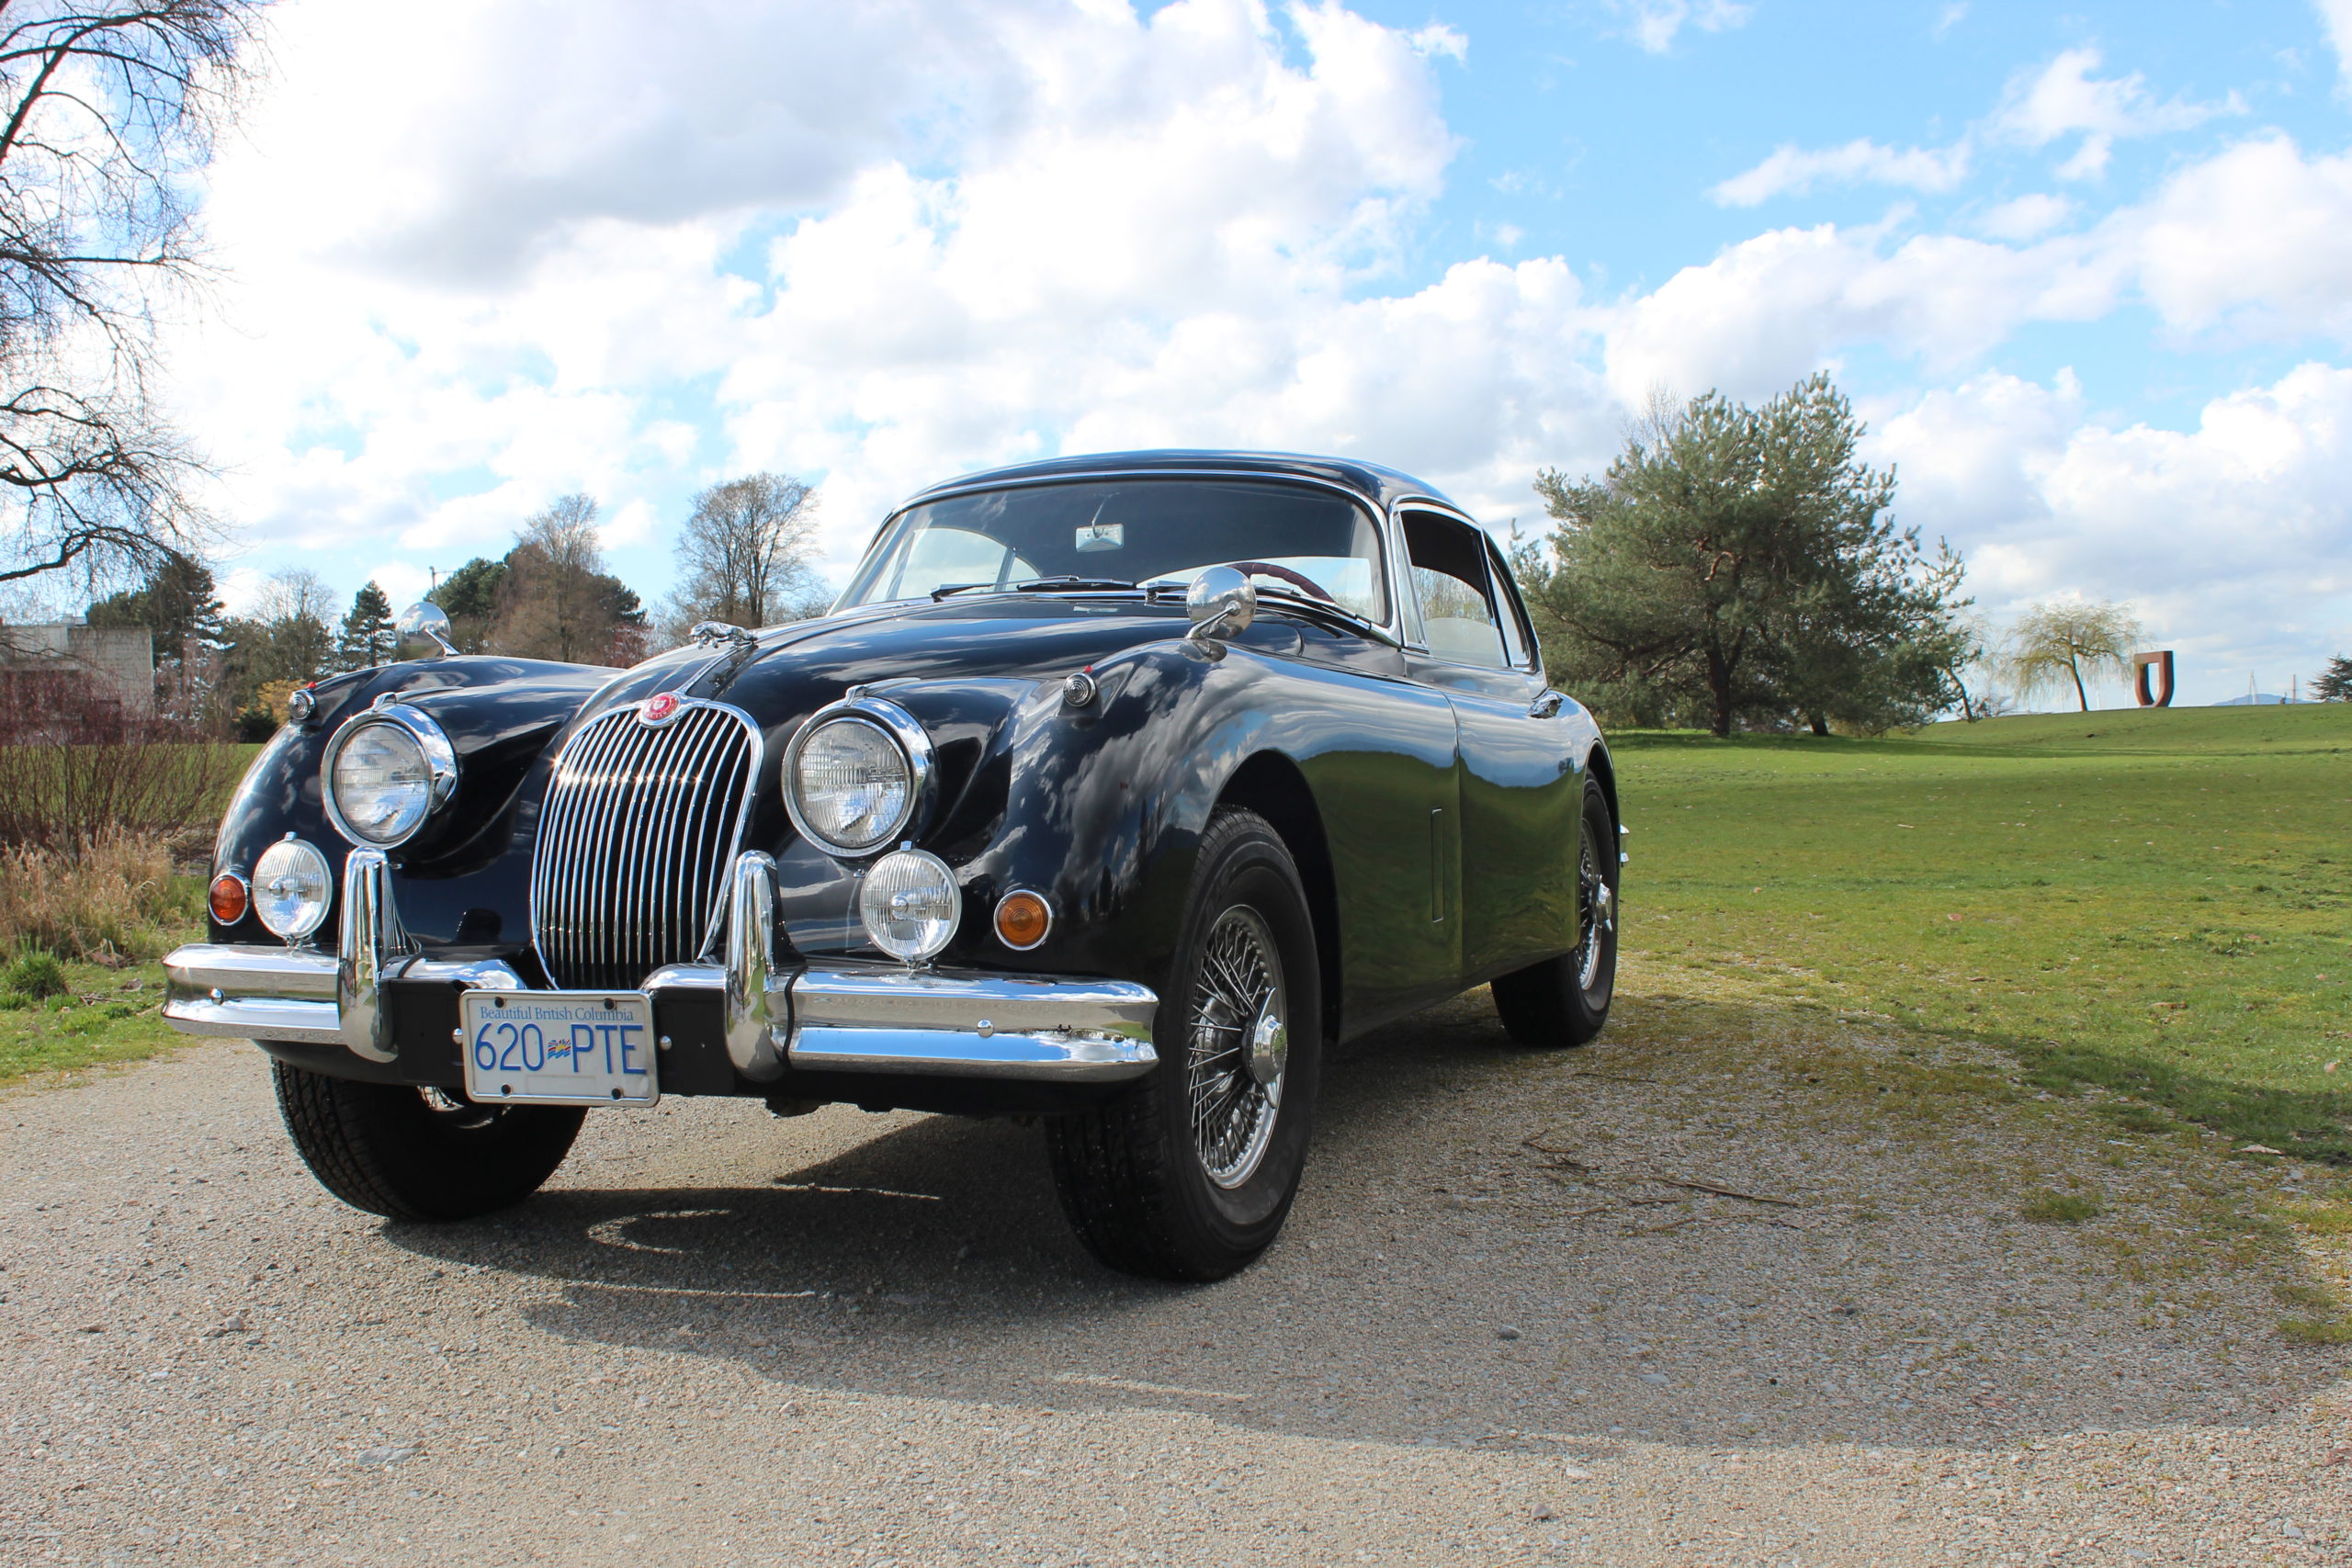 Classic, Collectible & British Cars For Sale | BMC Motorworks Ltd.